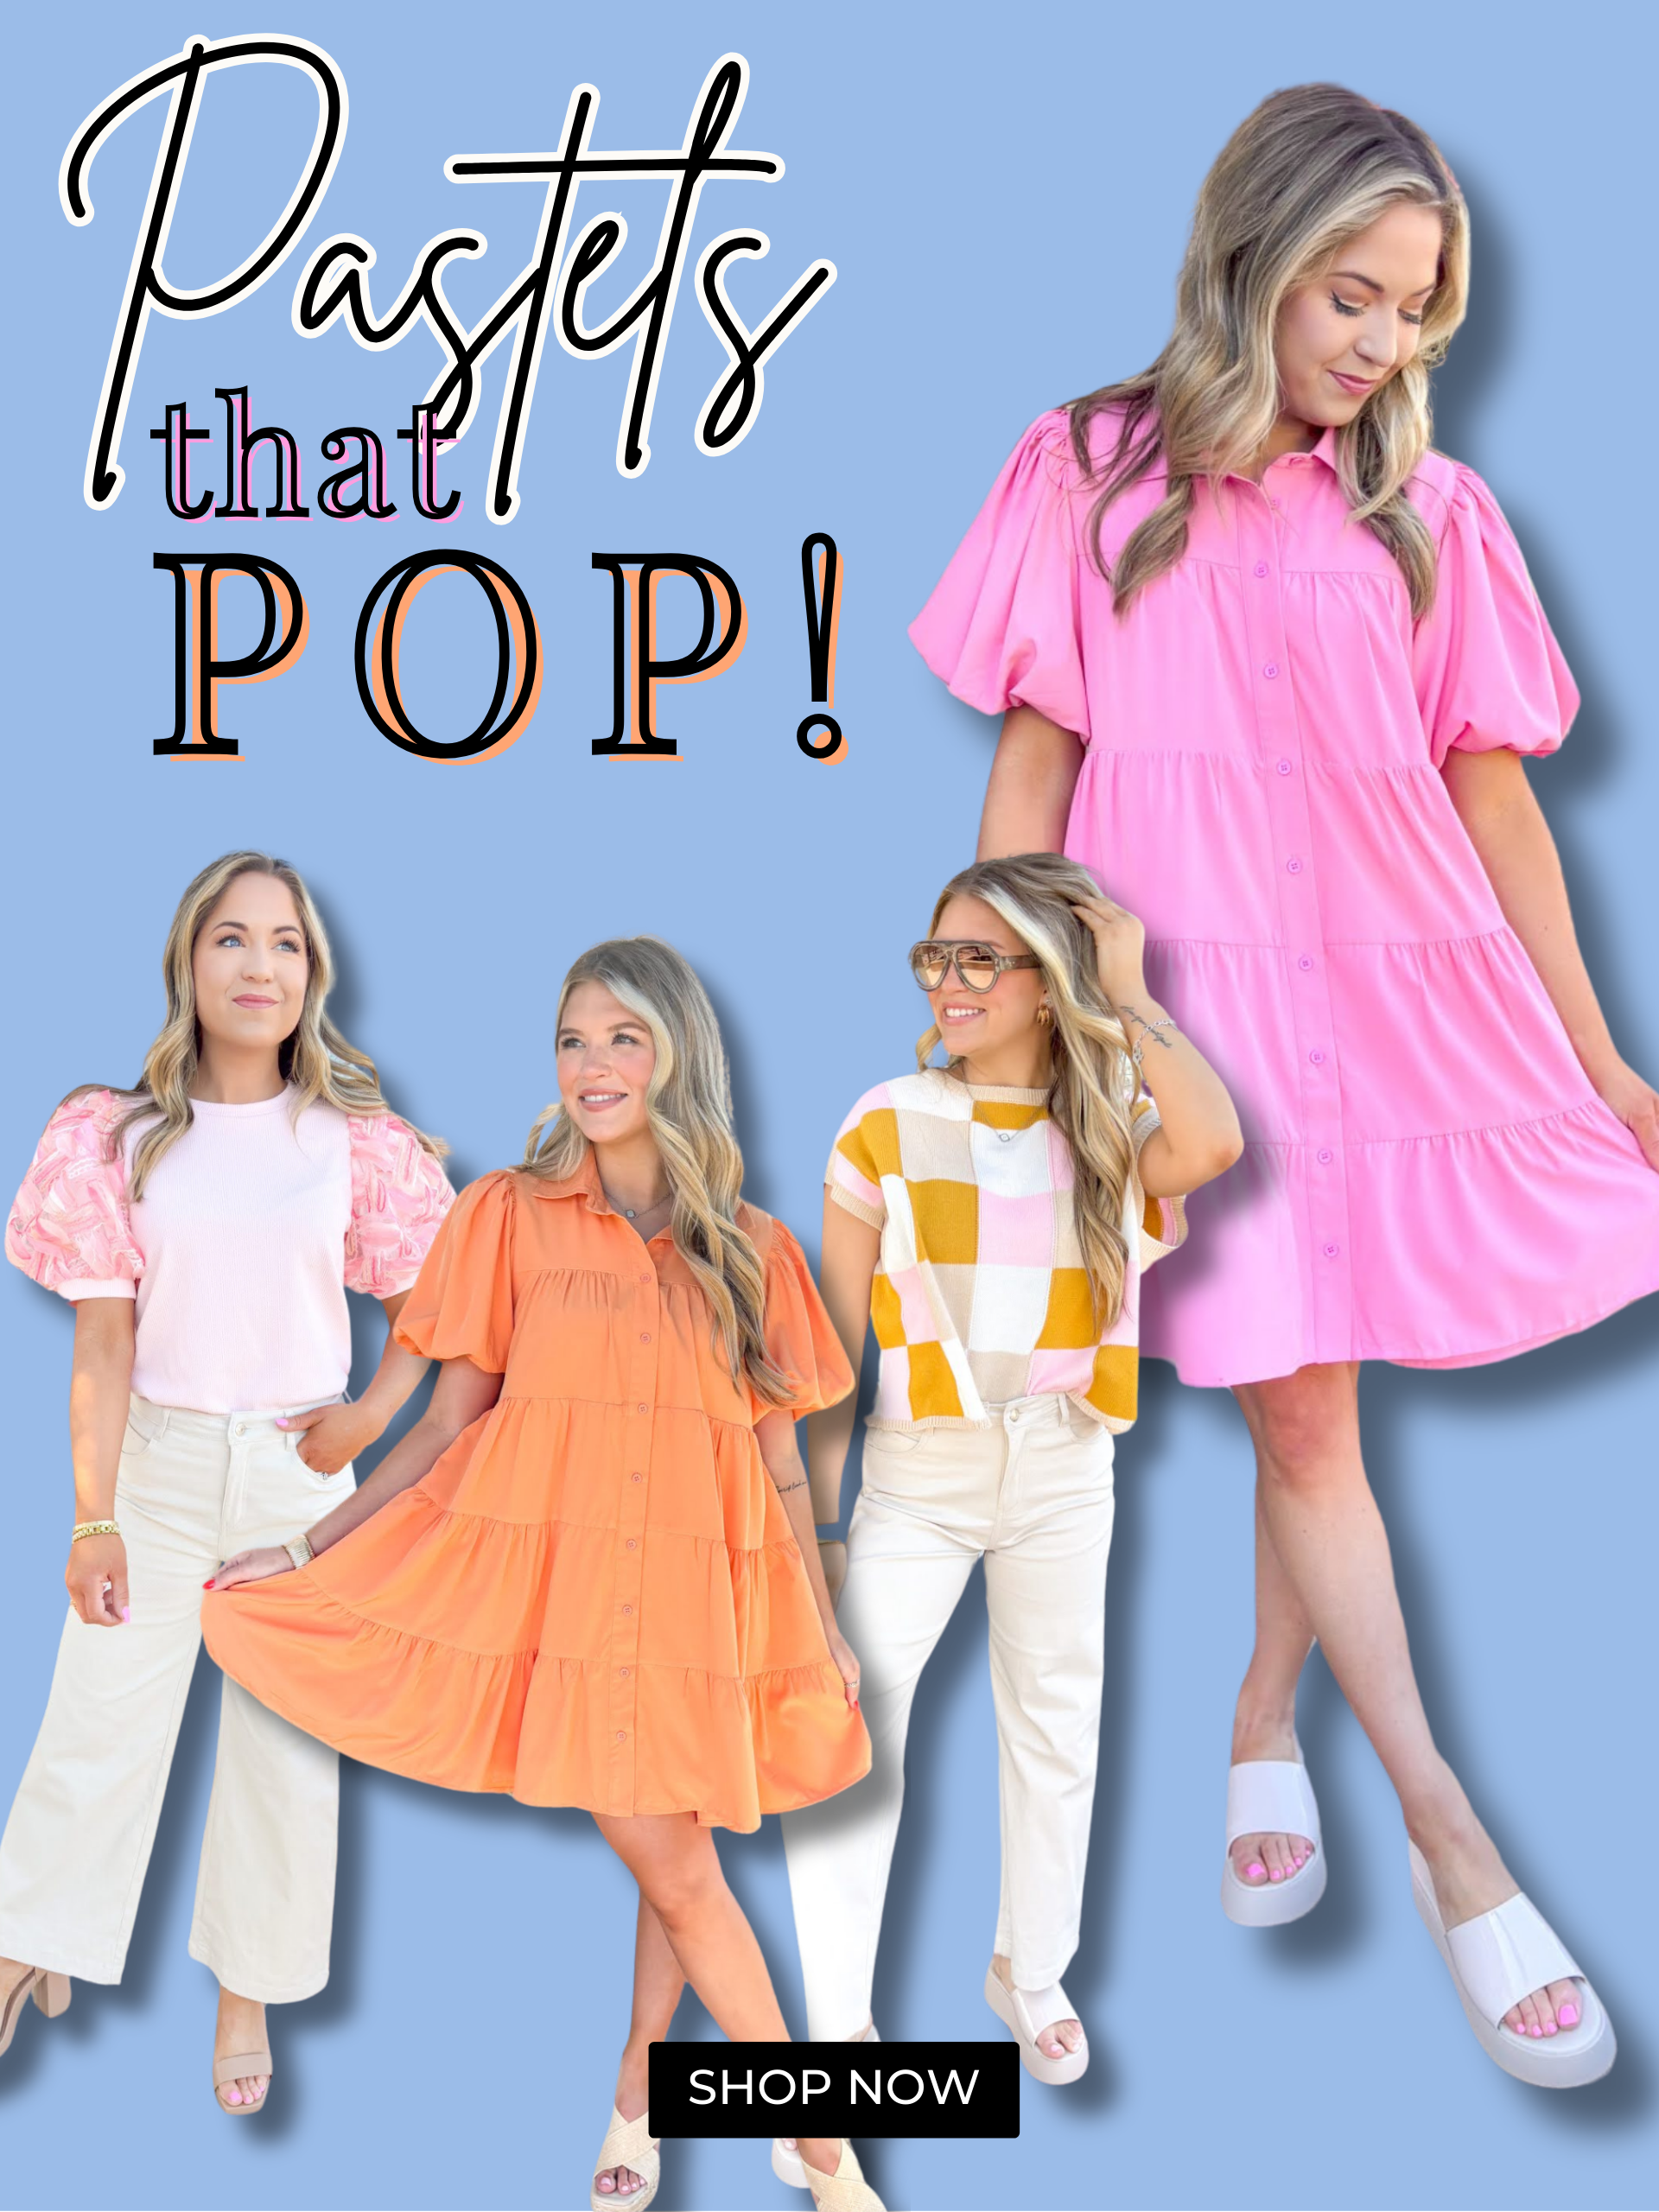 Pastels that pop! Featuring models in multiple styles including a mini dress with tiers and short-puff sleeves in shades of pink, orange and light blue. Models wearing wide leg off white jeans styled with a checked sleeveless sweater top and a top with puffy sleeves with pink sheer detail.